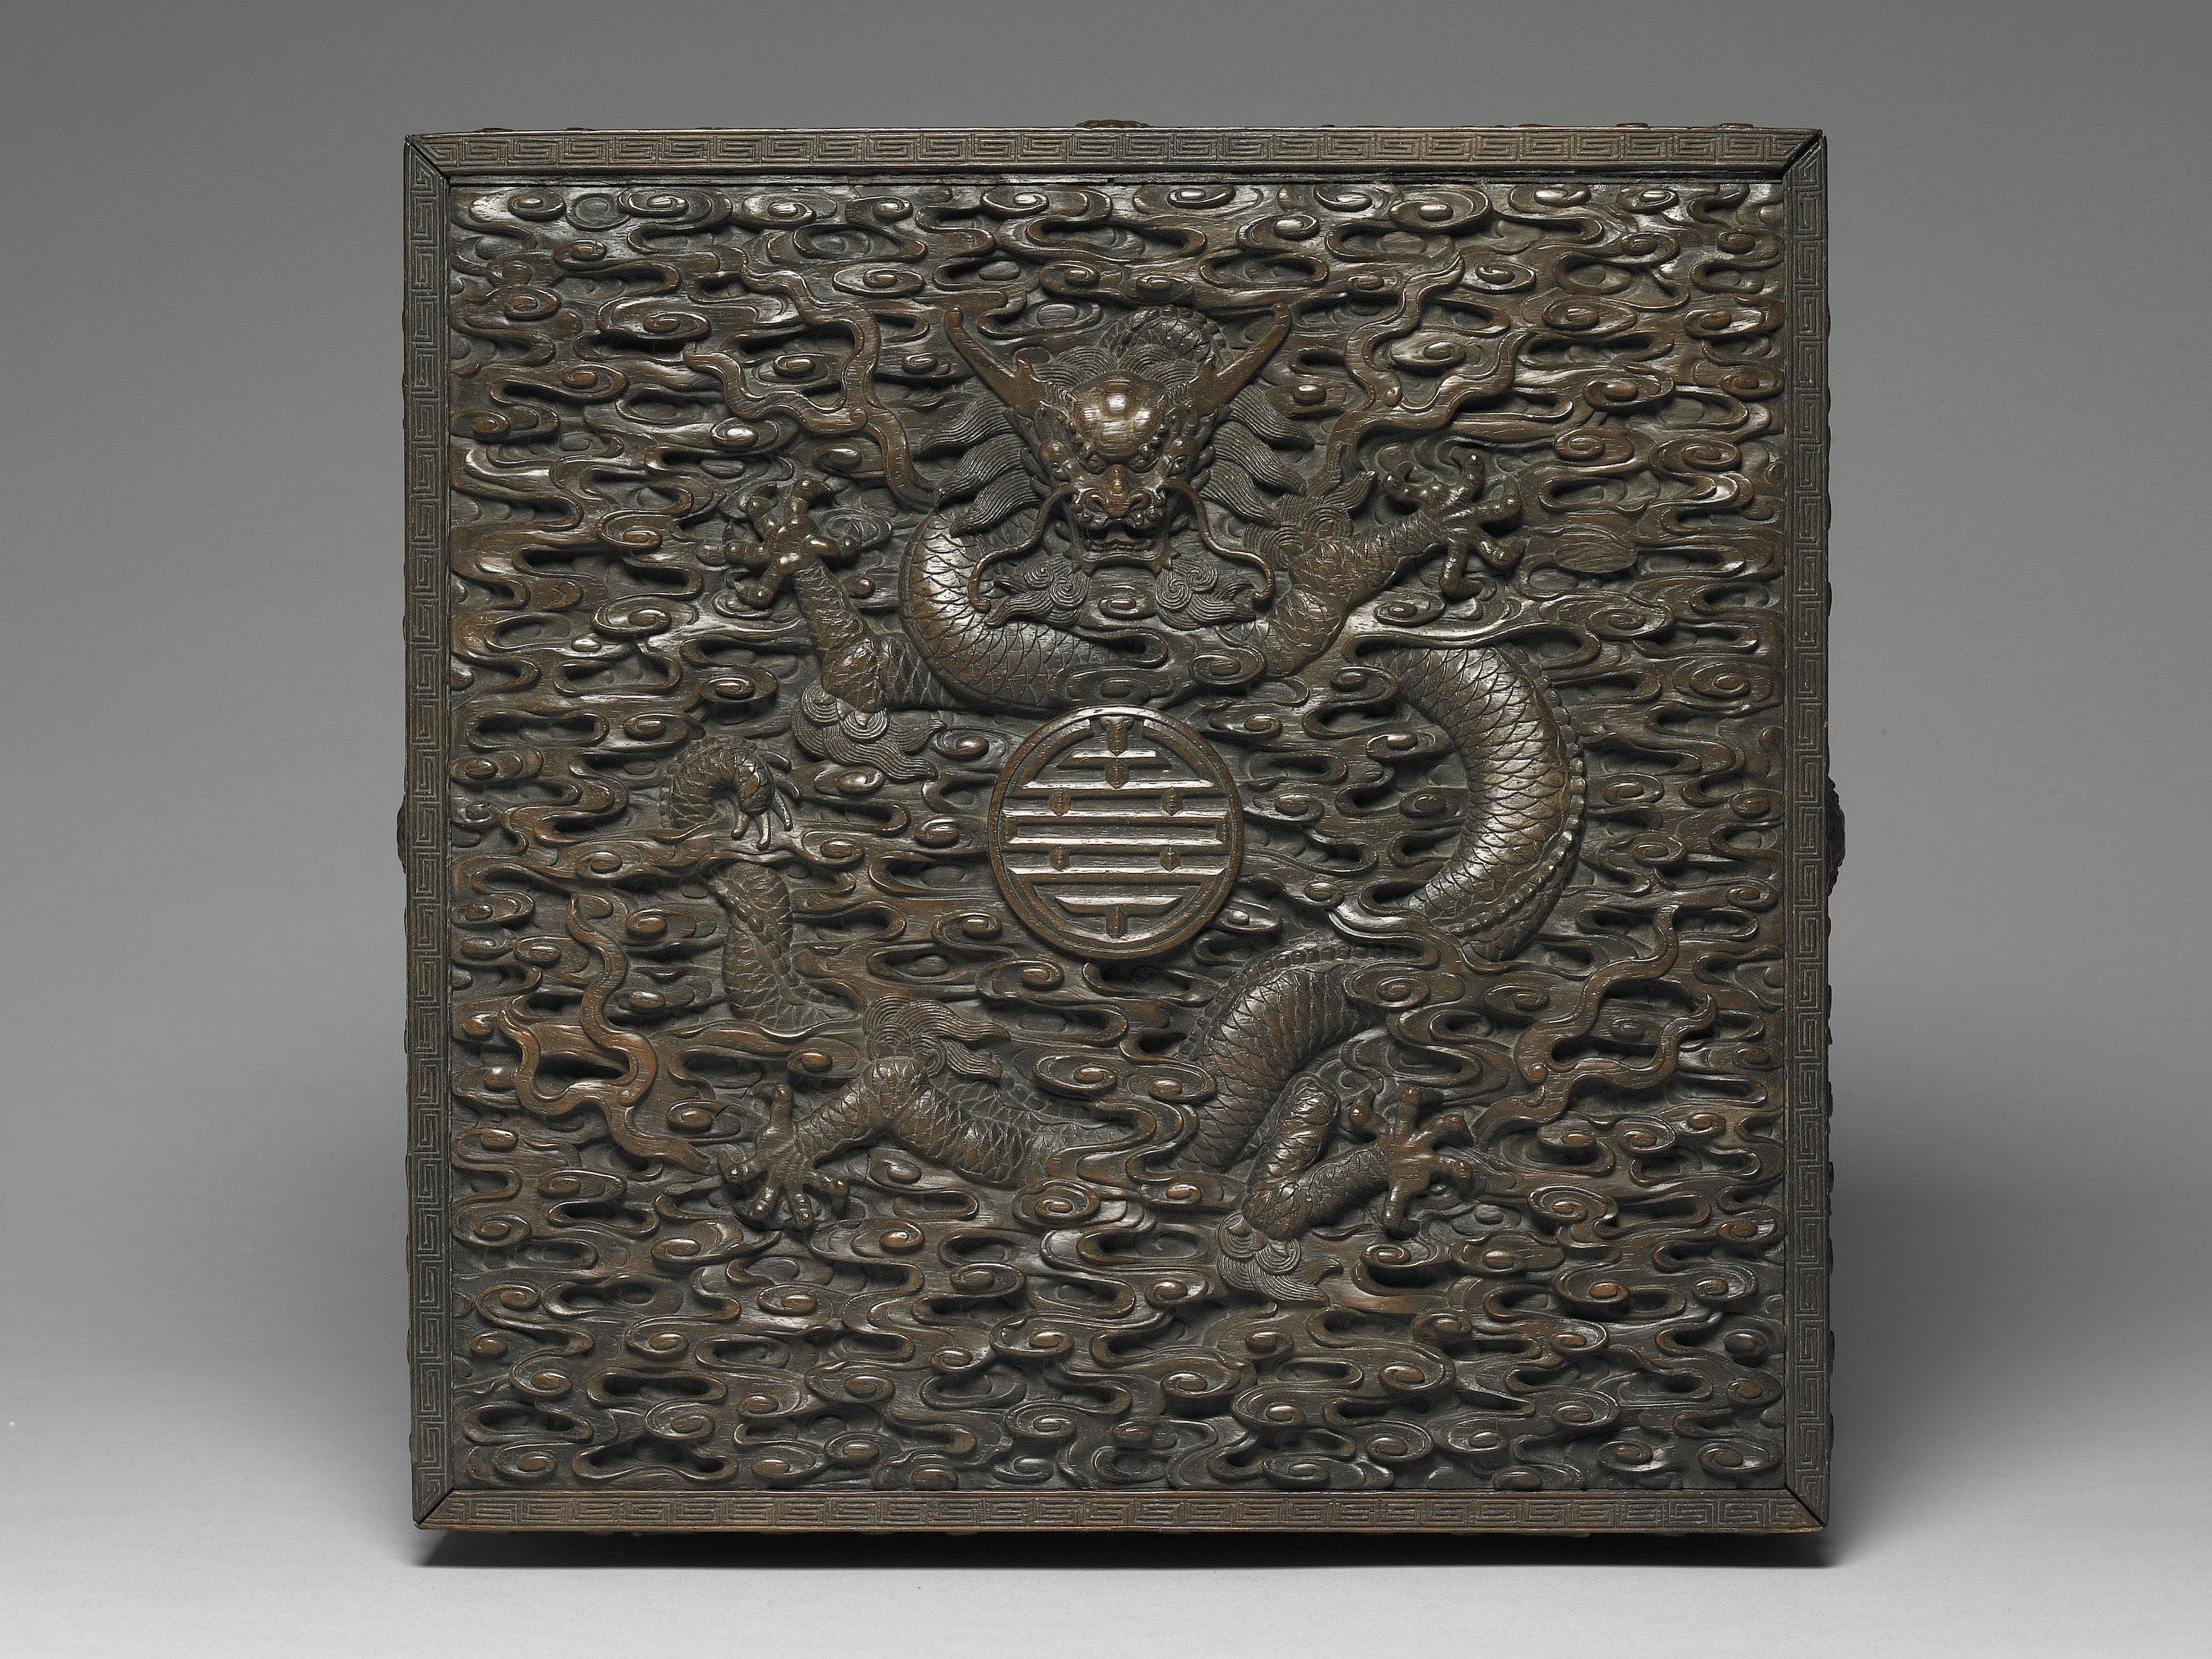 Square red sandalwood curio box with carved dragon decoration